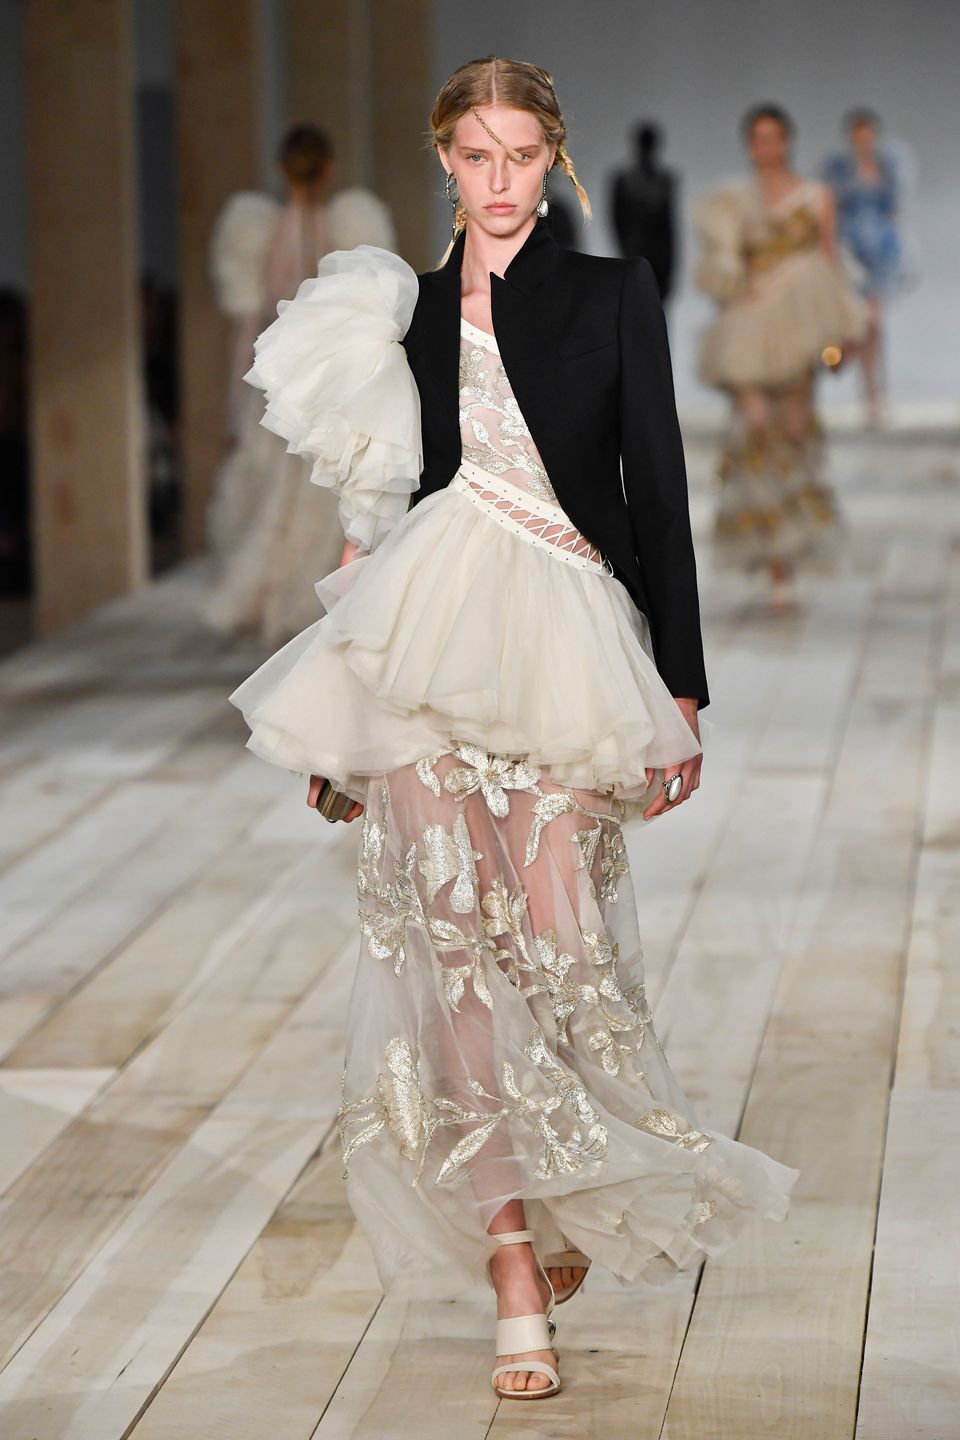 It's Impossible To Pick A Favorite Look From The Alexander McQueen Show ...